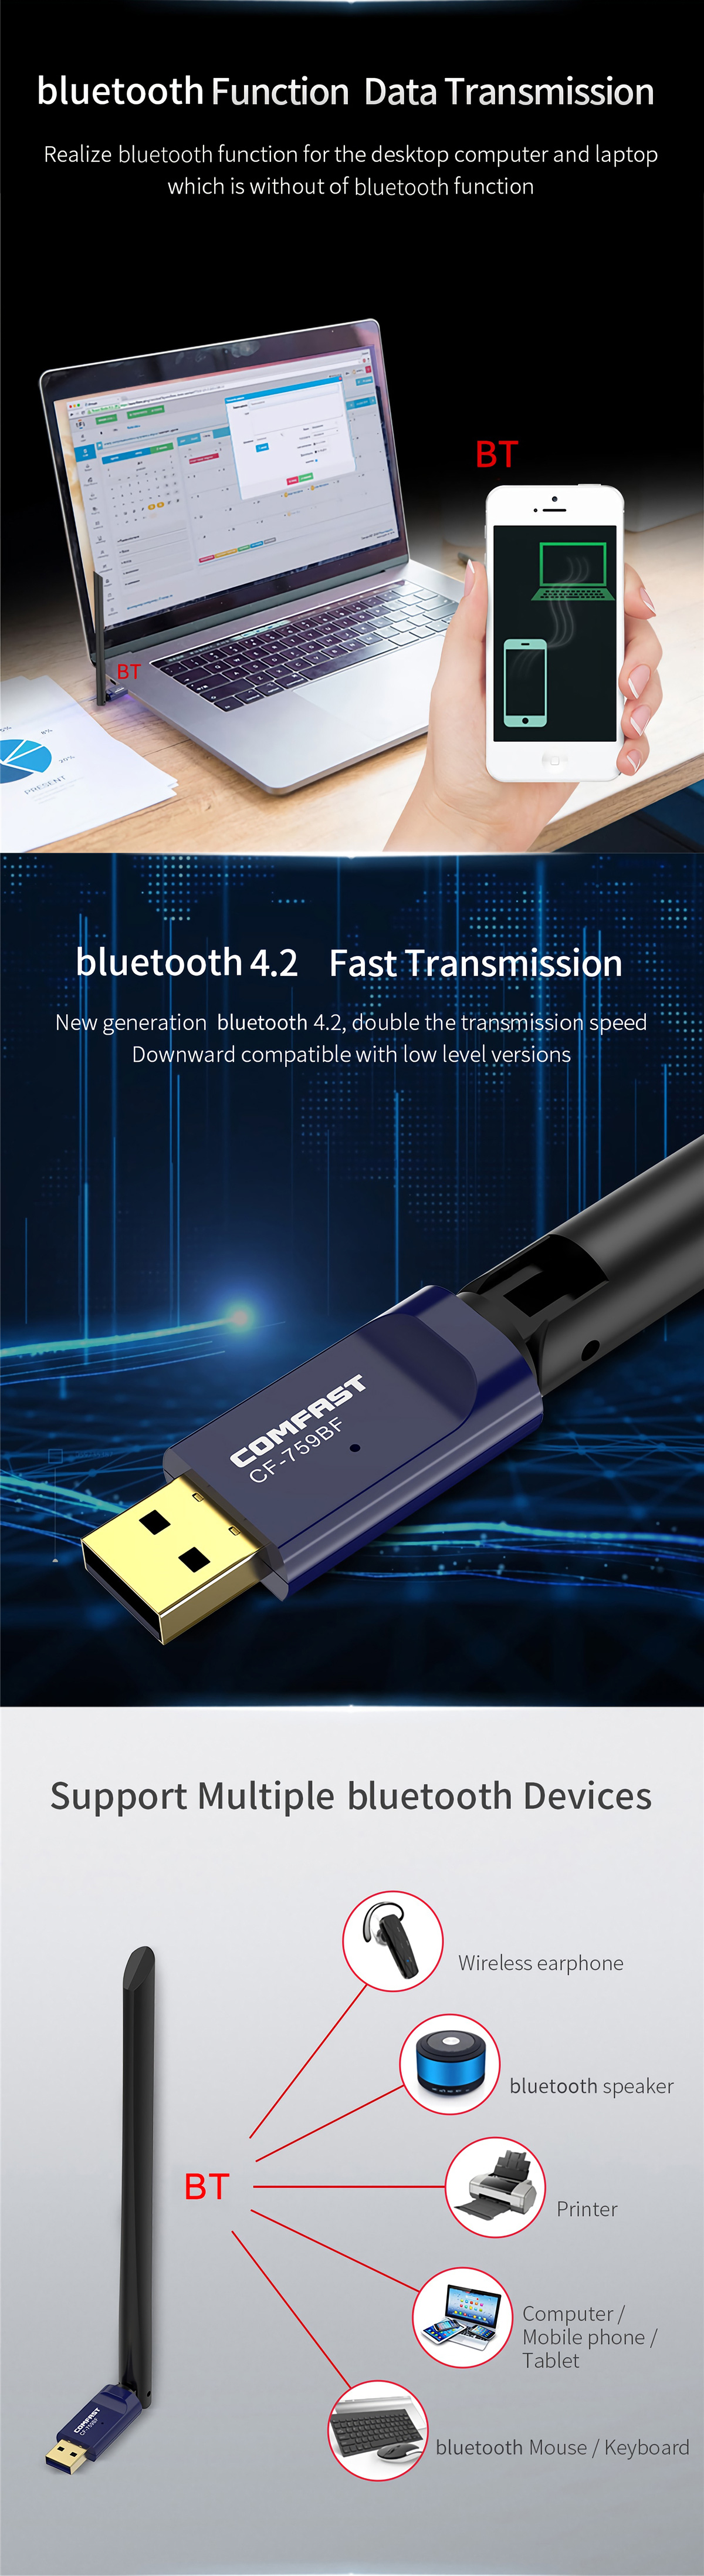 Comfast-CF-759BF-Dual-Band-24G58G-650Mbps-Wifi-Receiver-WiFi-Transmiter-bluetooth-42-USB-Adapter-wit-1659267-2